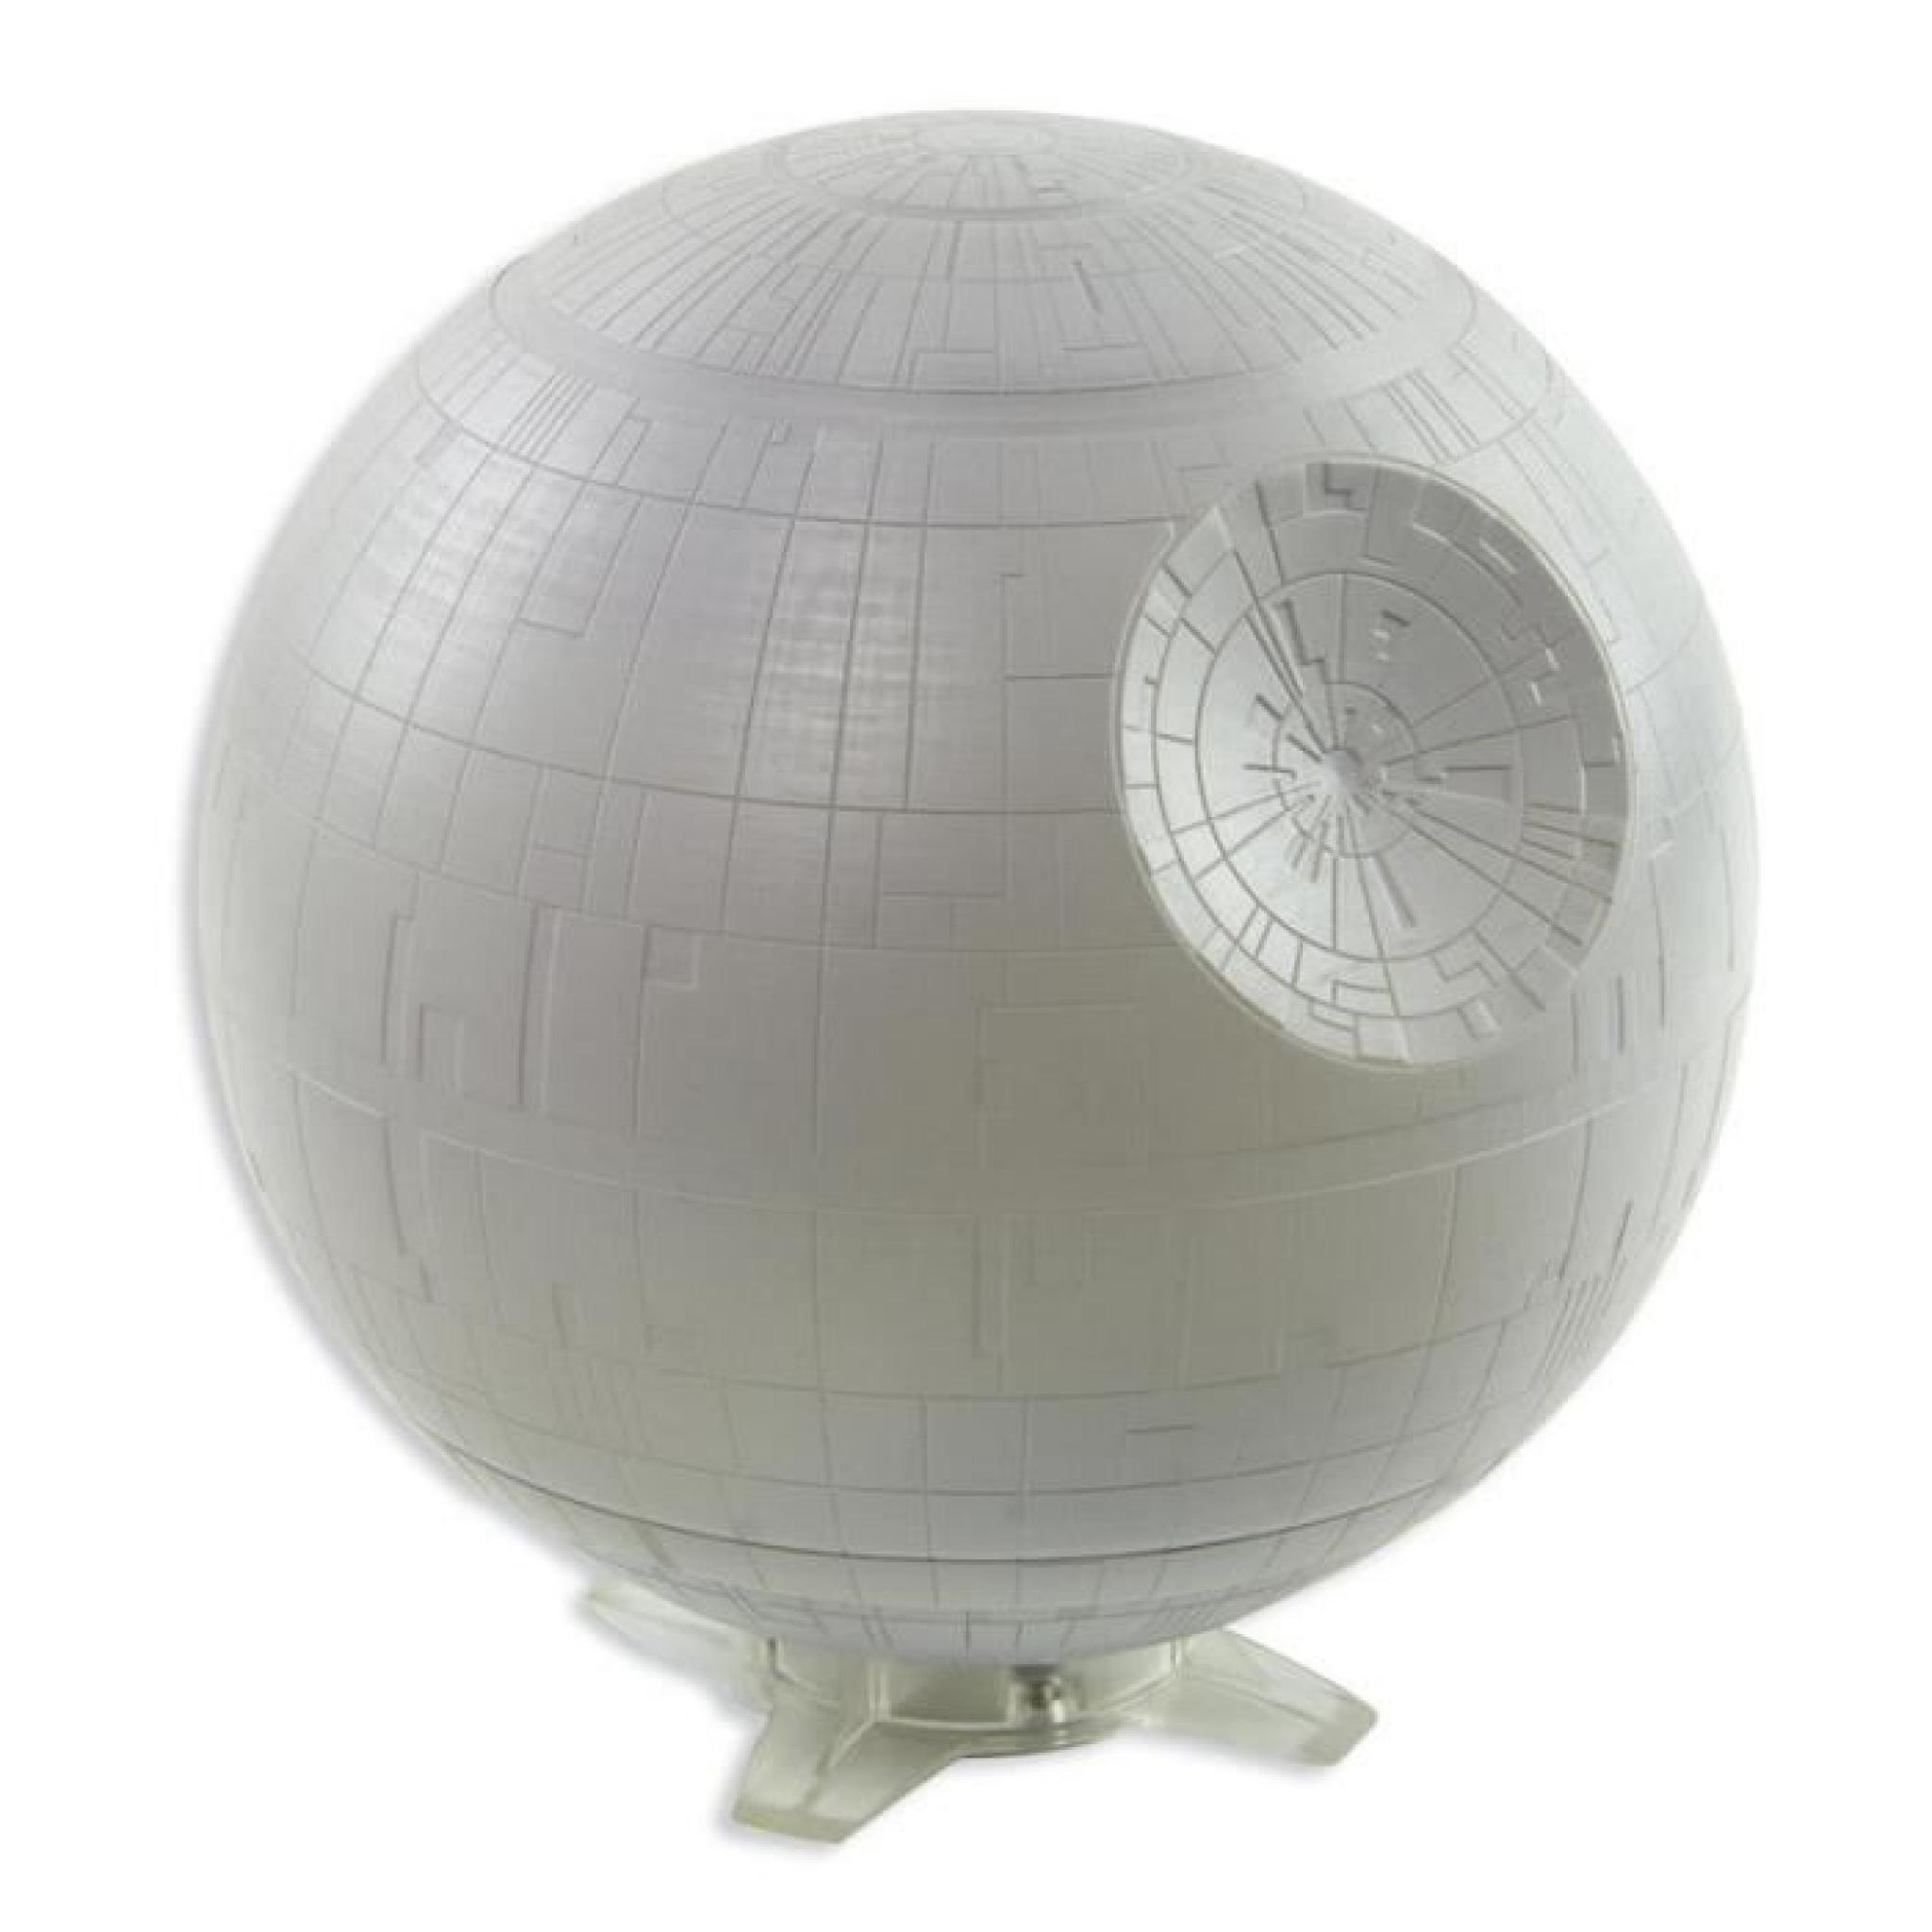 Lampe d'ambiance Star Wars